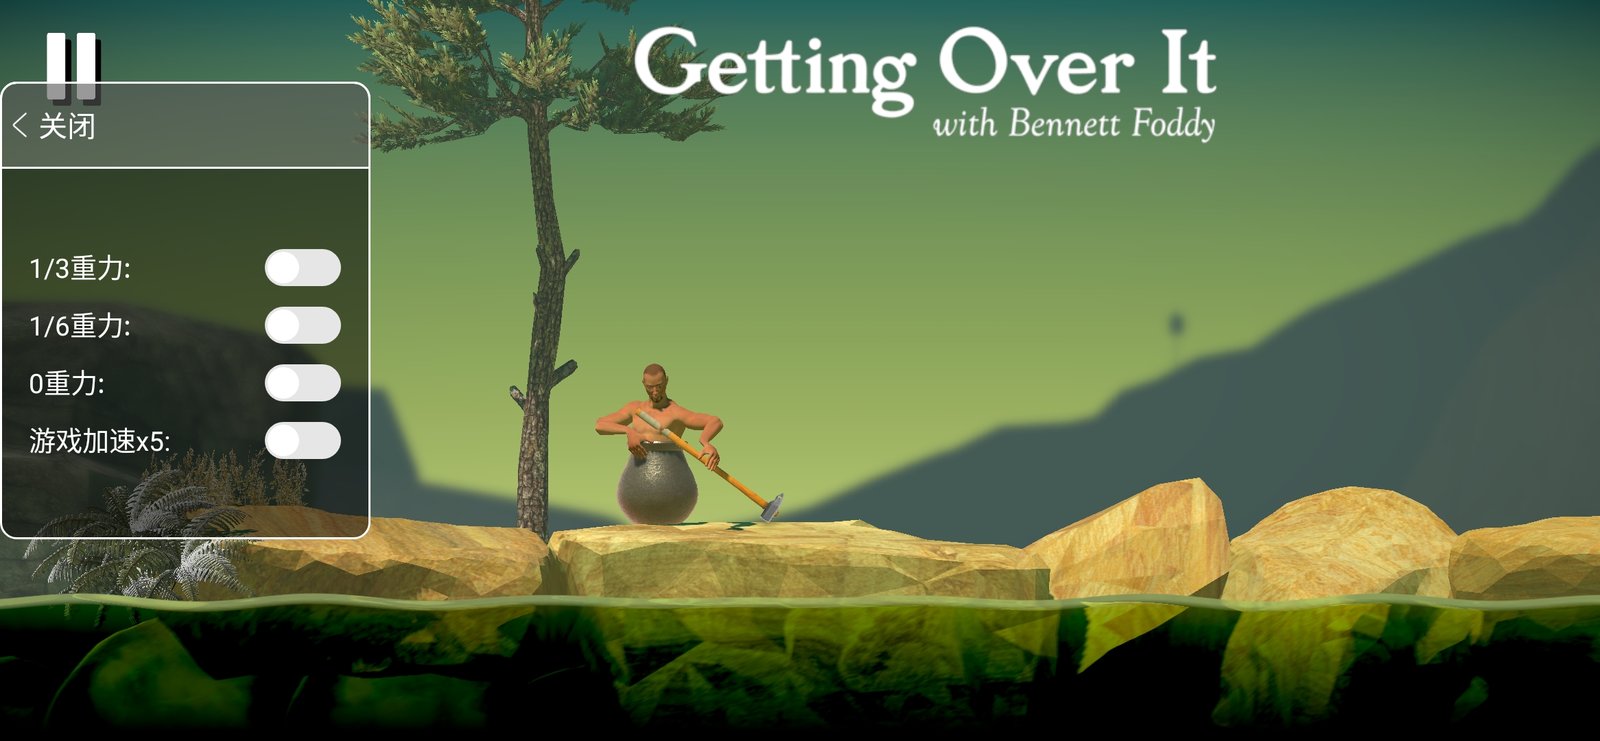 Download do APK de Map Getting Over It with Bennett Foddy para Android